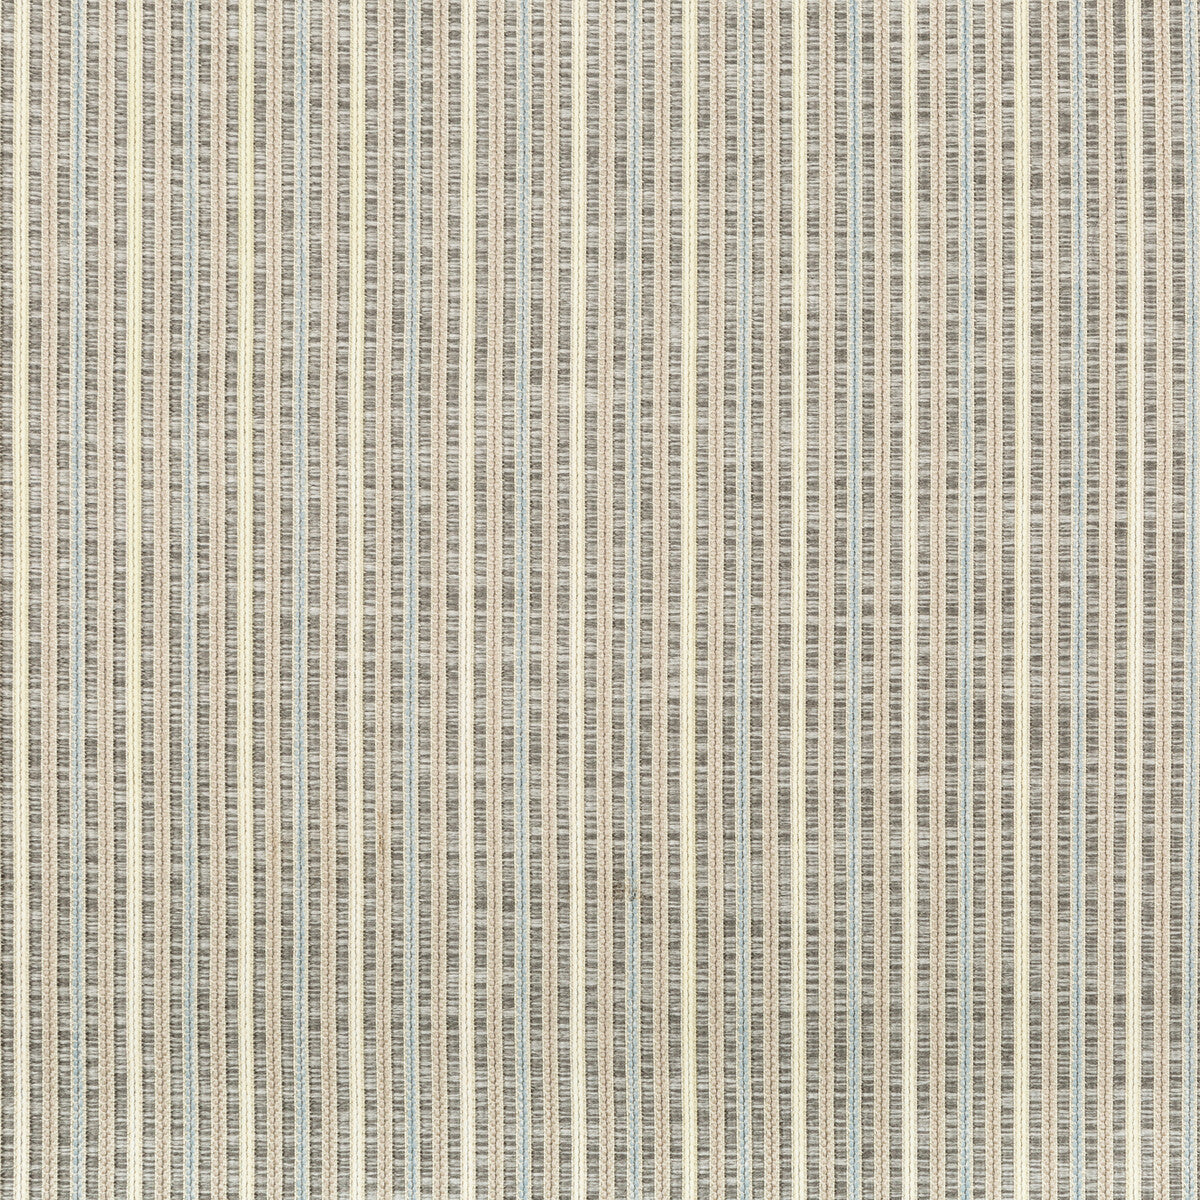 Coastland fabric in shore color - pattern 35847.1511.0 - by Kravet Contract in the Kravet Cruise collection